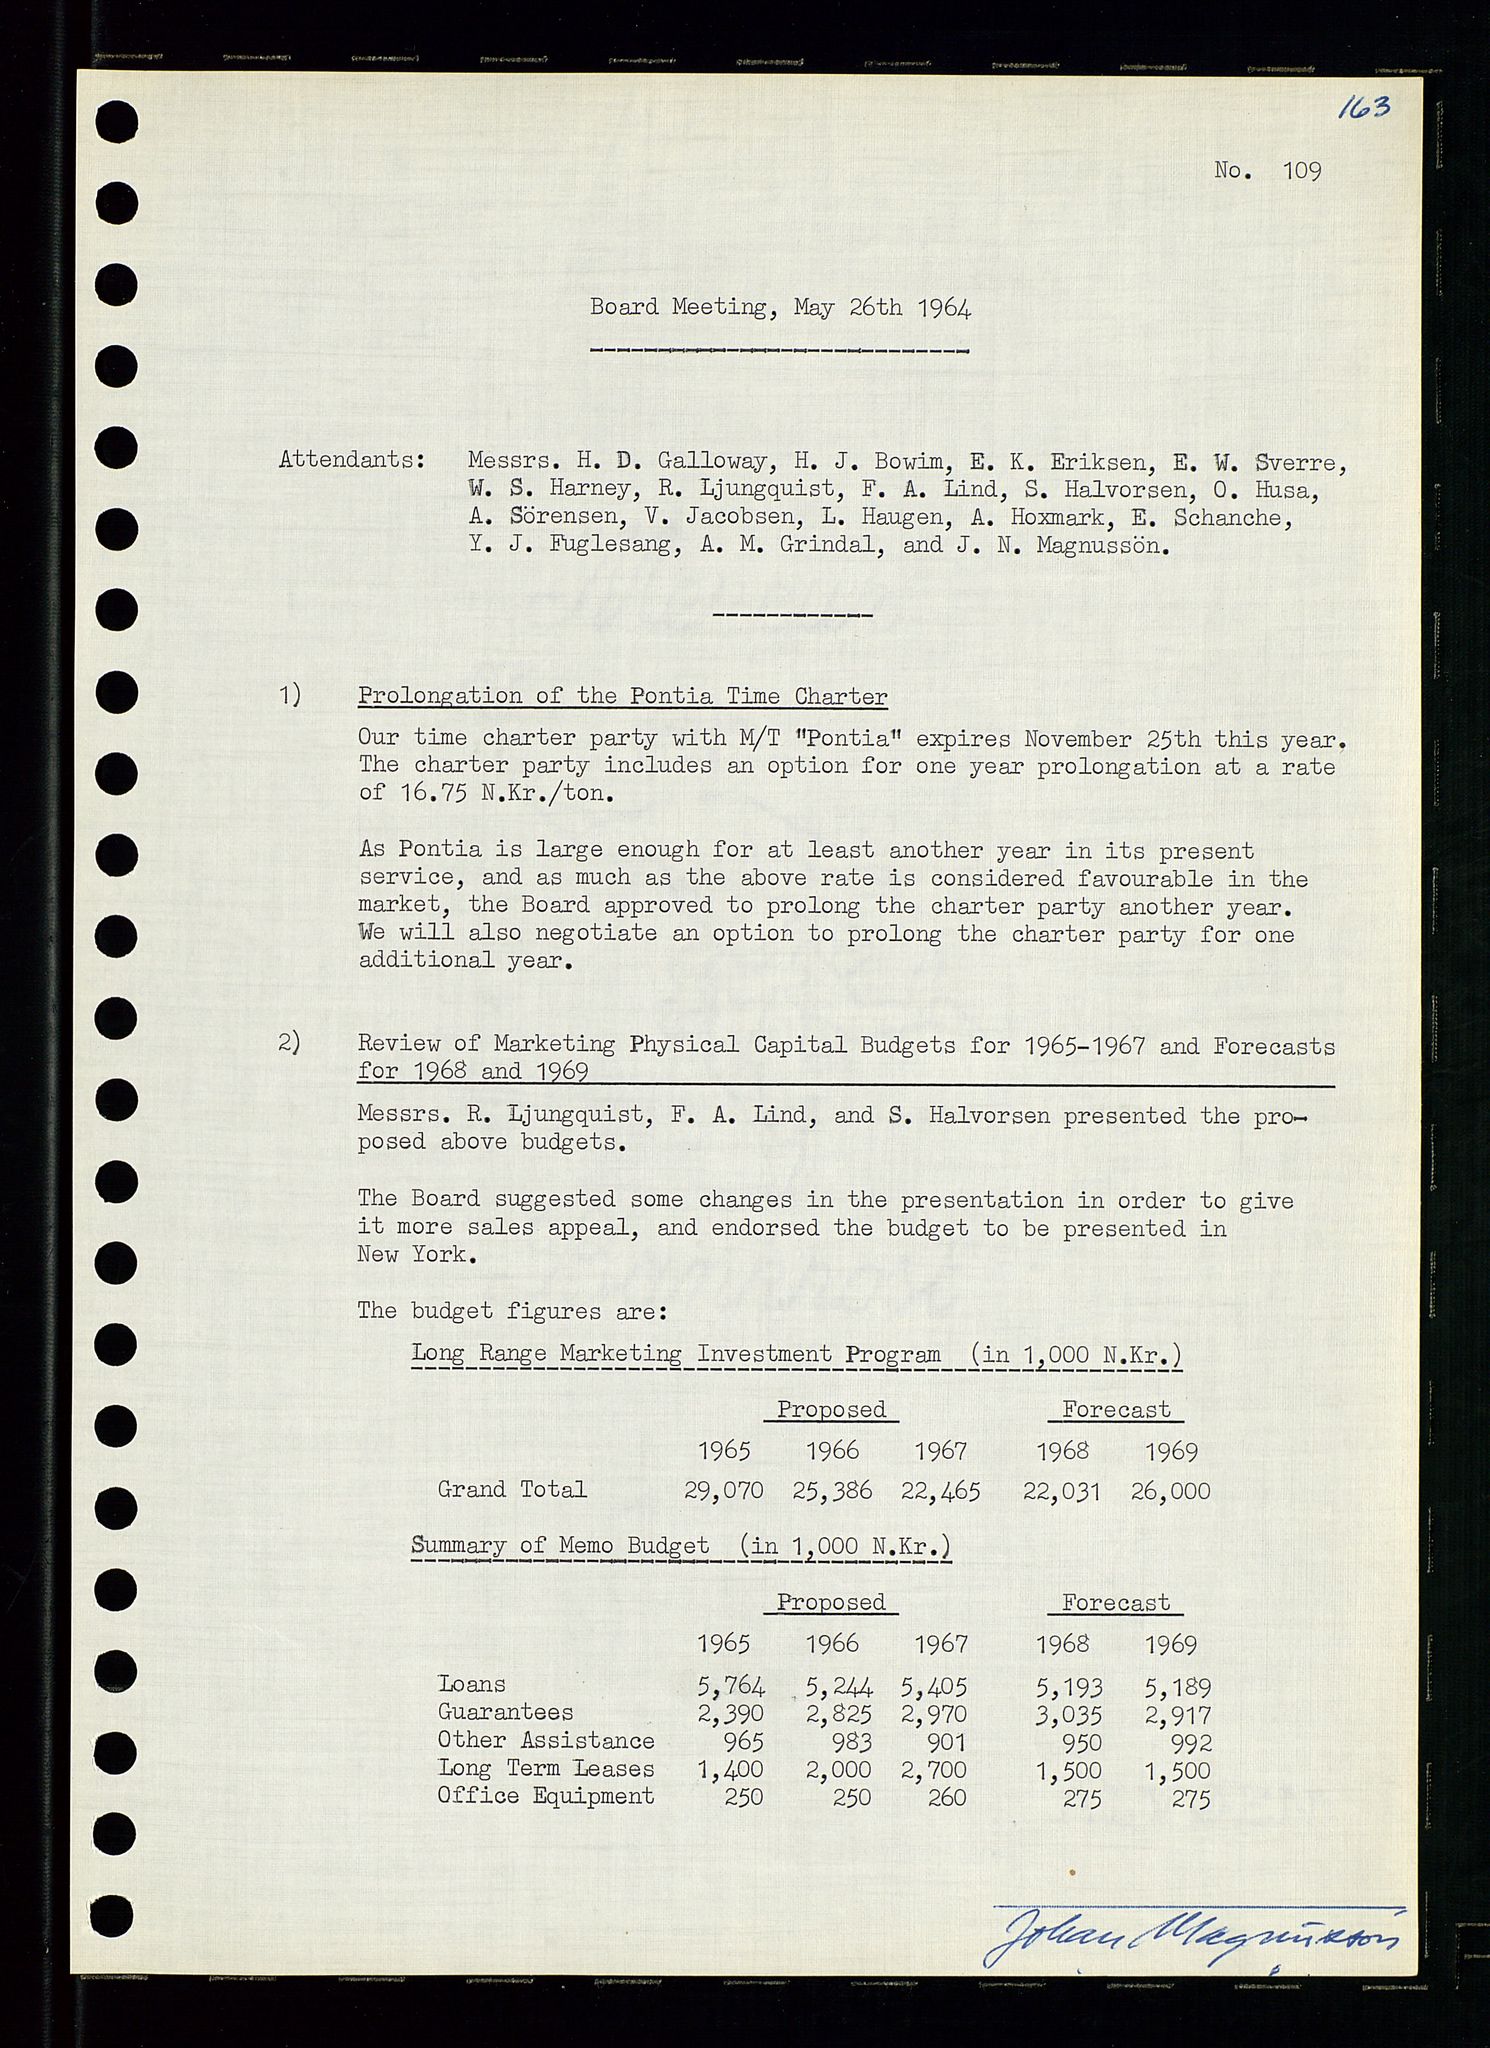 Pa 0982 - Esso Norge A/S, SAST/A-100448/A/Aa/L0001/0004: Den administrerende direksjon Board minutes (styrereferater) / Den administrerende direksjon Board minutes (styrereferater), 1963-1964, s. 99